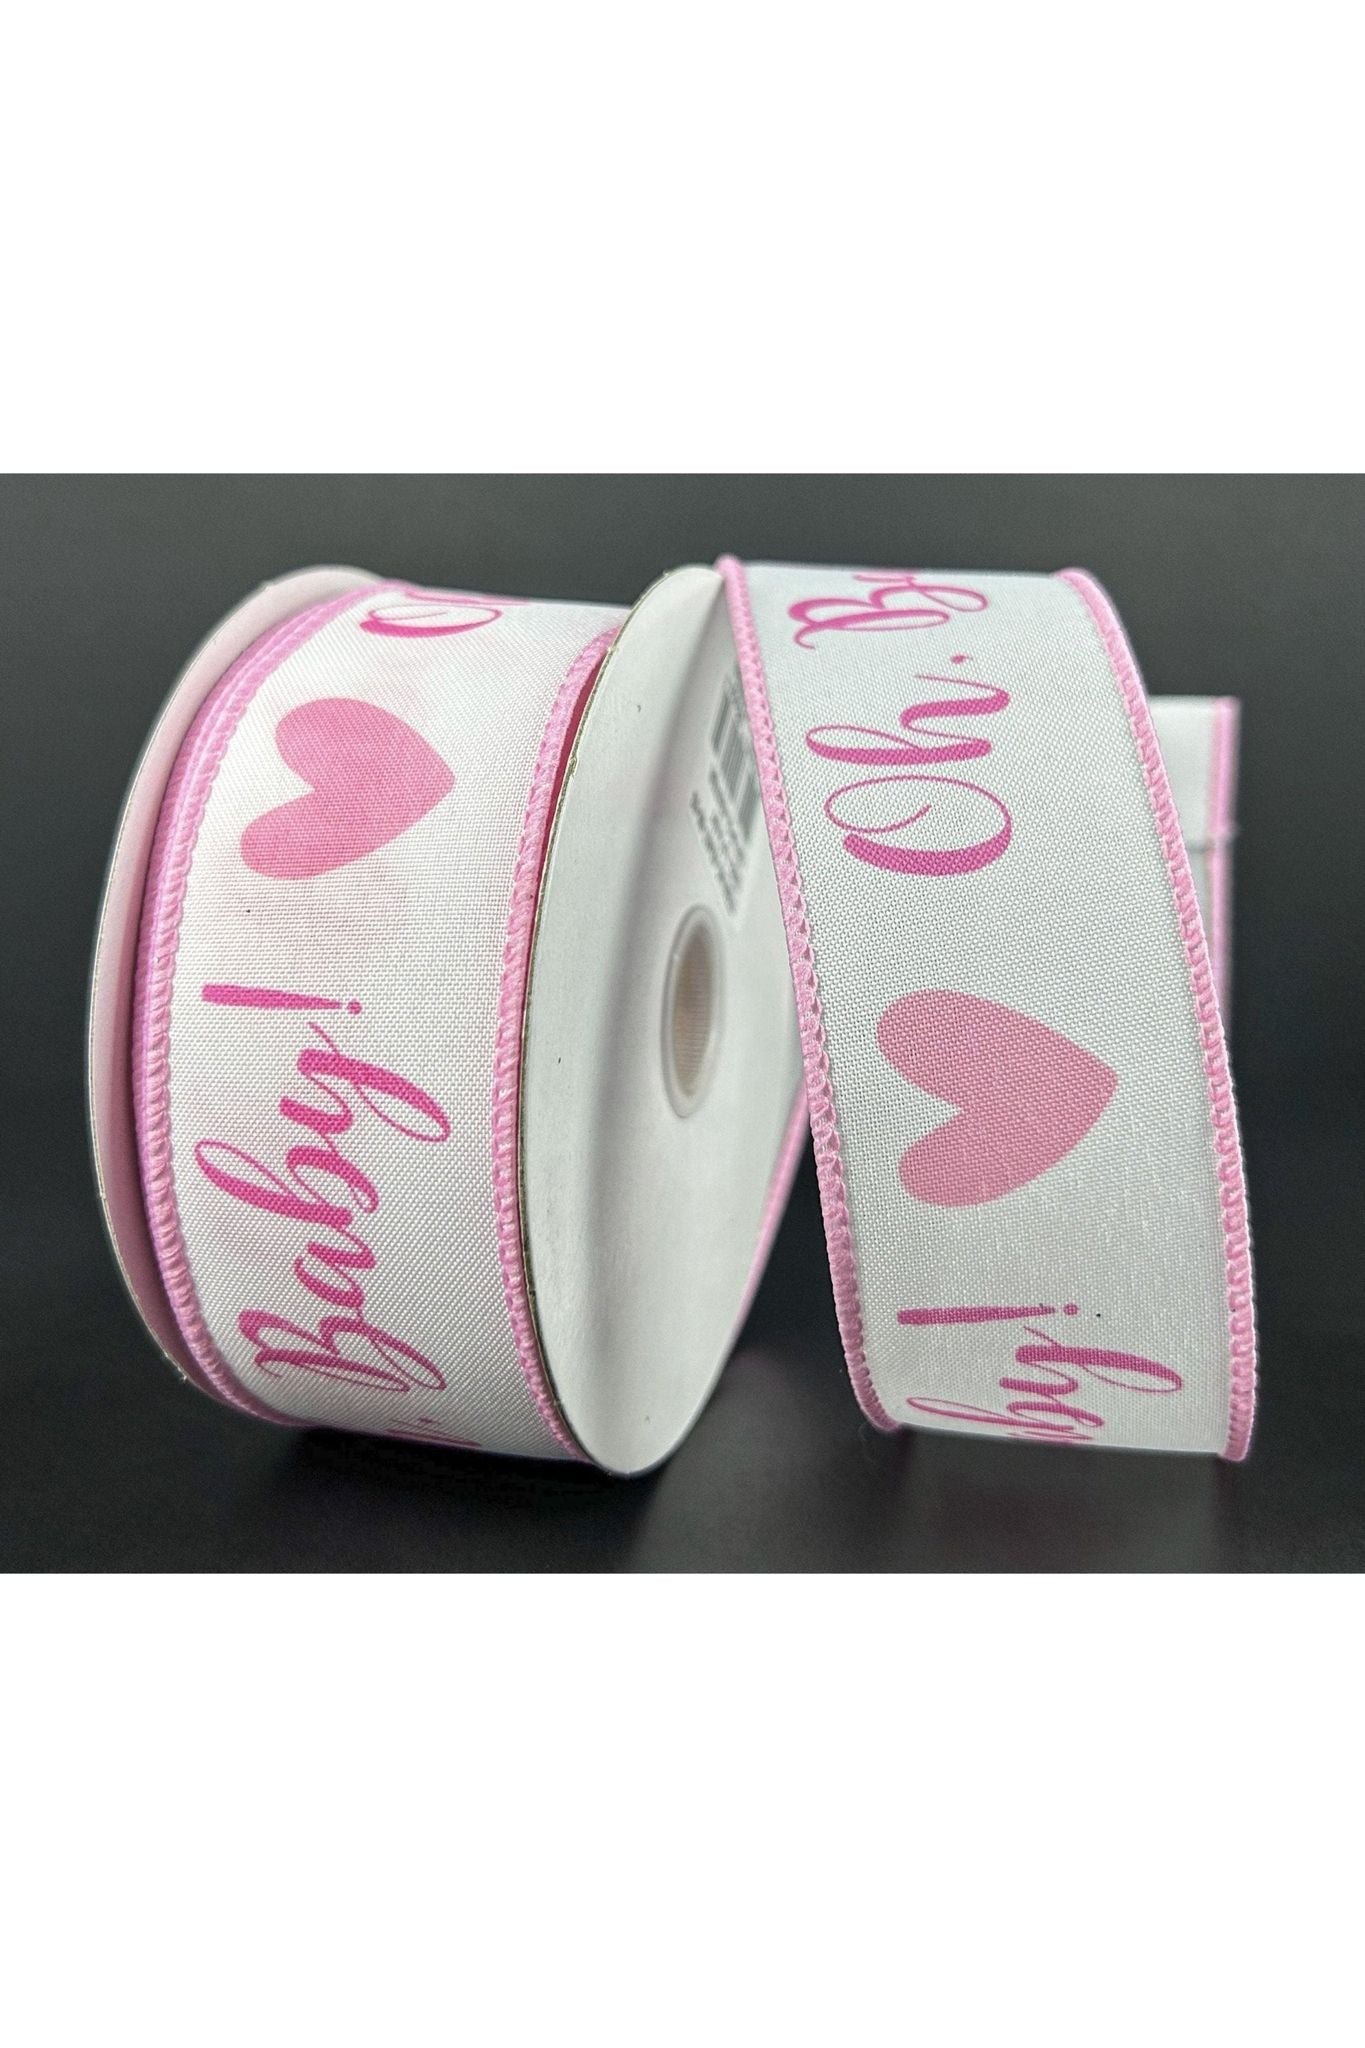 Shop For 1.5" Oh Baby Girl Ribbon: Pink & White (10 Yards) 42457-09-03